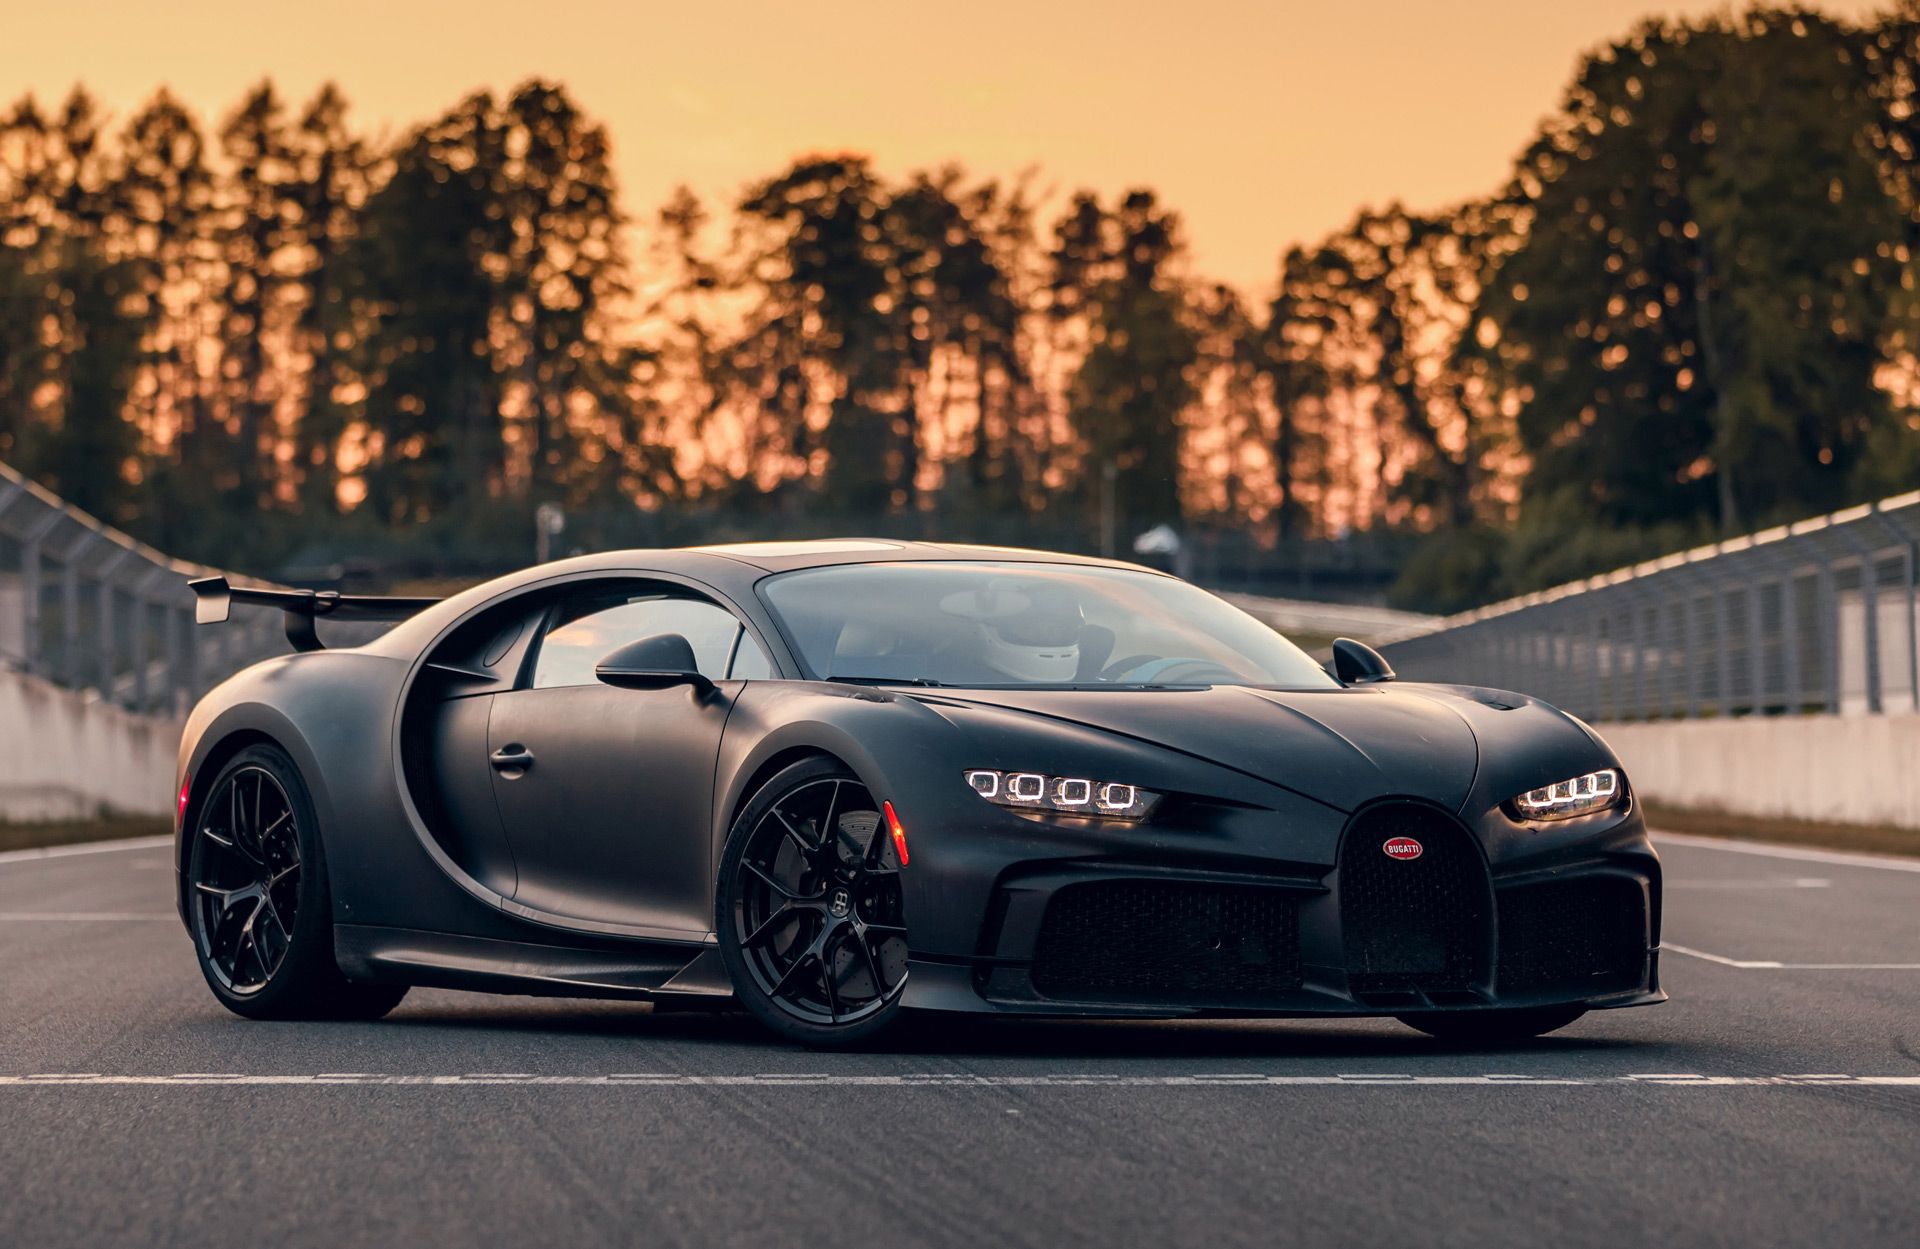 Bugatti Chiron parked on the road